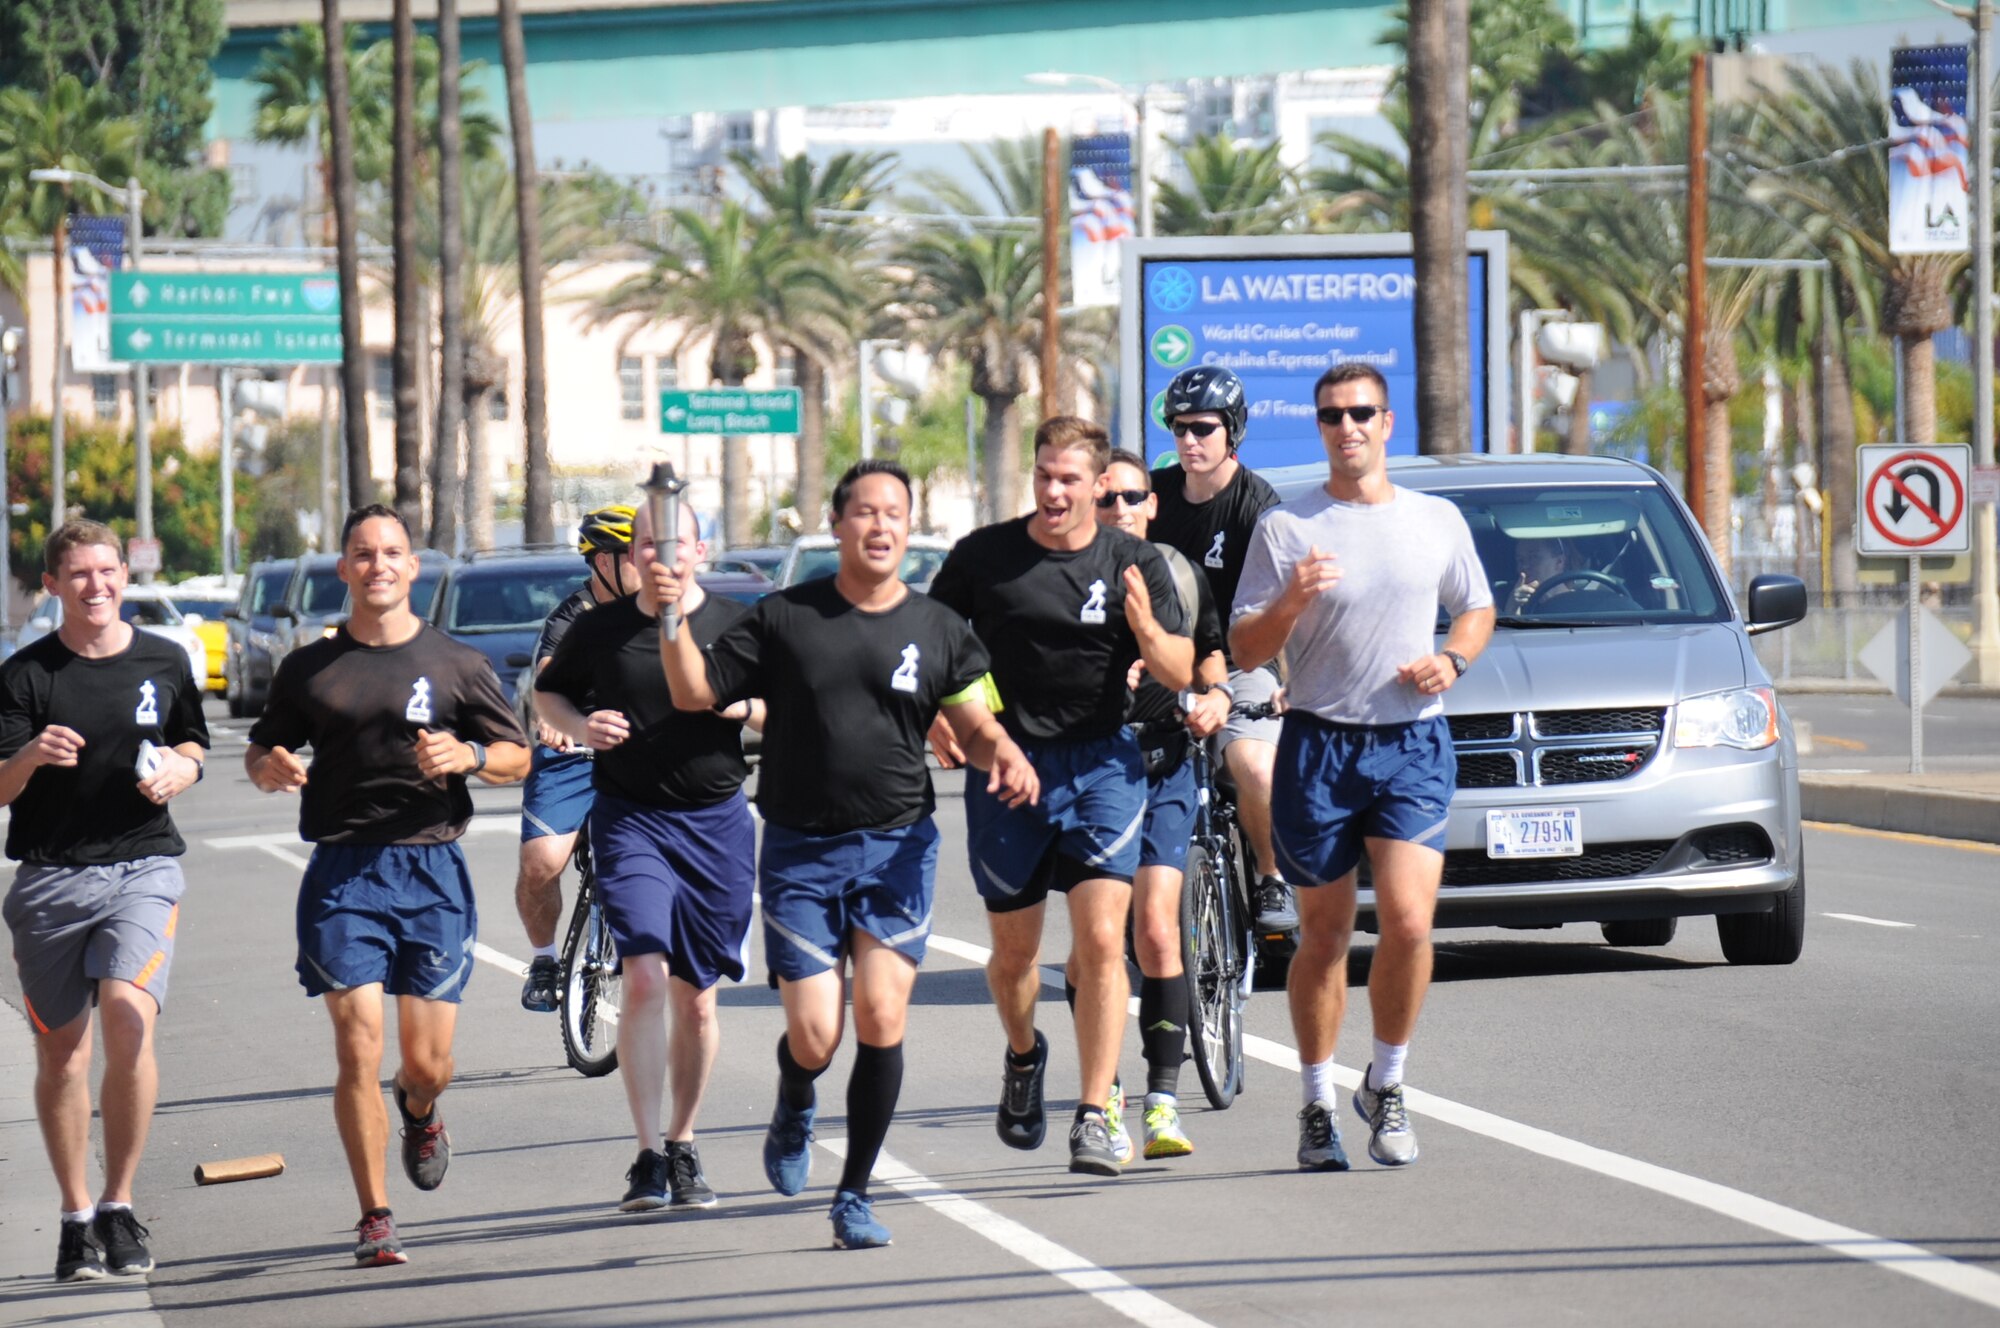 A team of runners from the Space and Missile Systems Center at Los Angeles Air Force Base in El Segundo, Calif. carry the POW/MIA torch on the start of a 24-hour, 154 mile long course through the South Bay beach communities of Los Angeles to honor those who were held captive – and those still missing and unaccounted for during times of armed conflict. (U.S. Air Force photo/Van Ha)